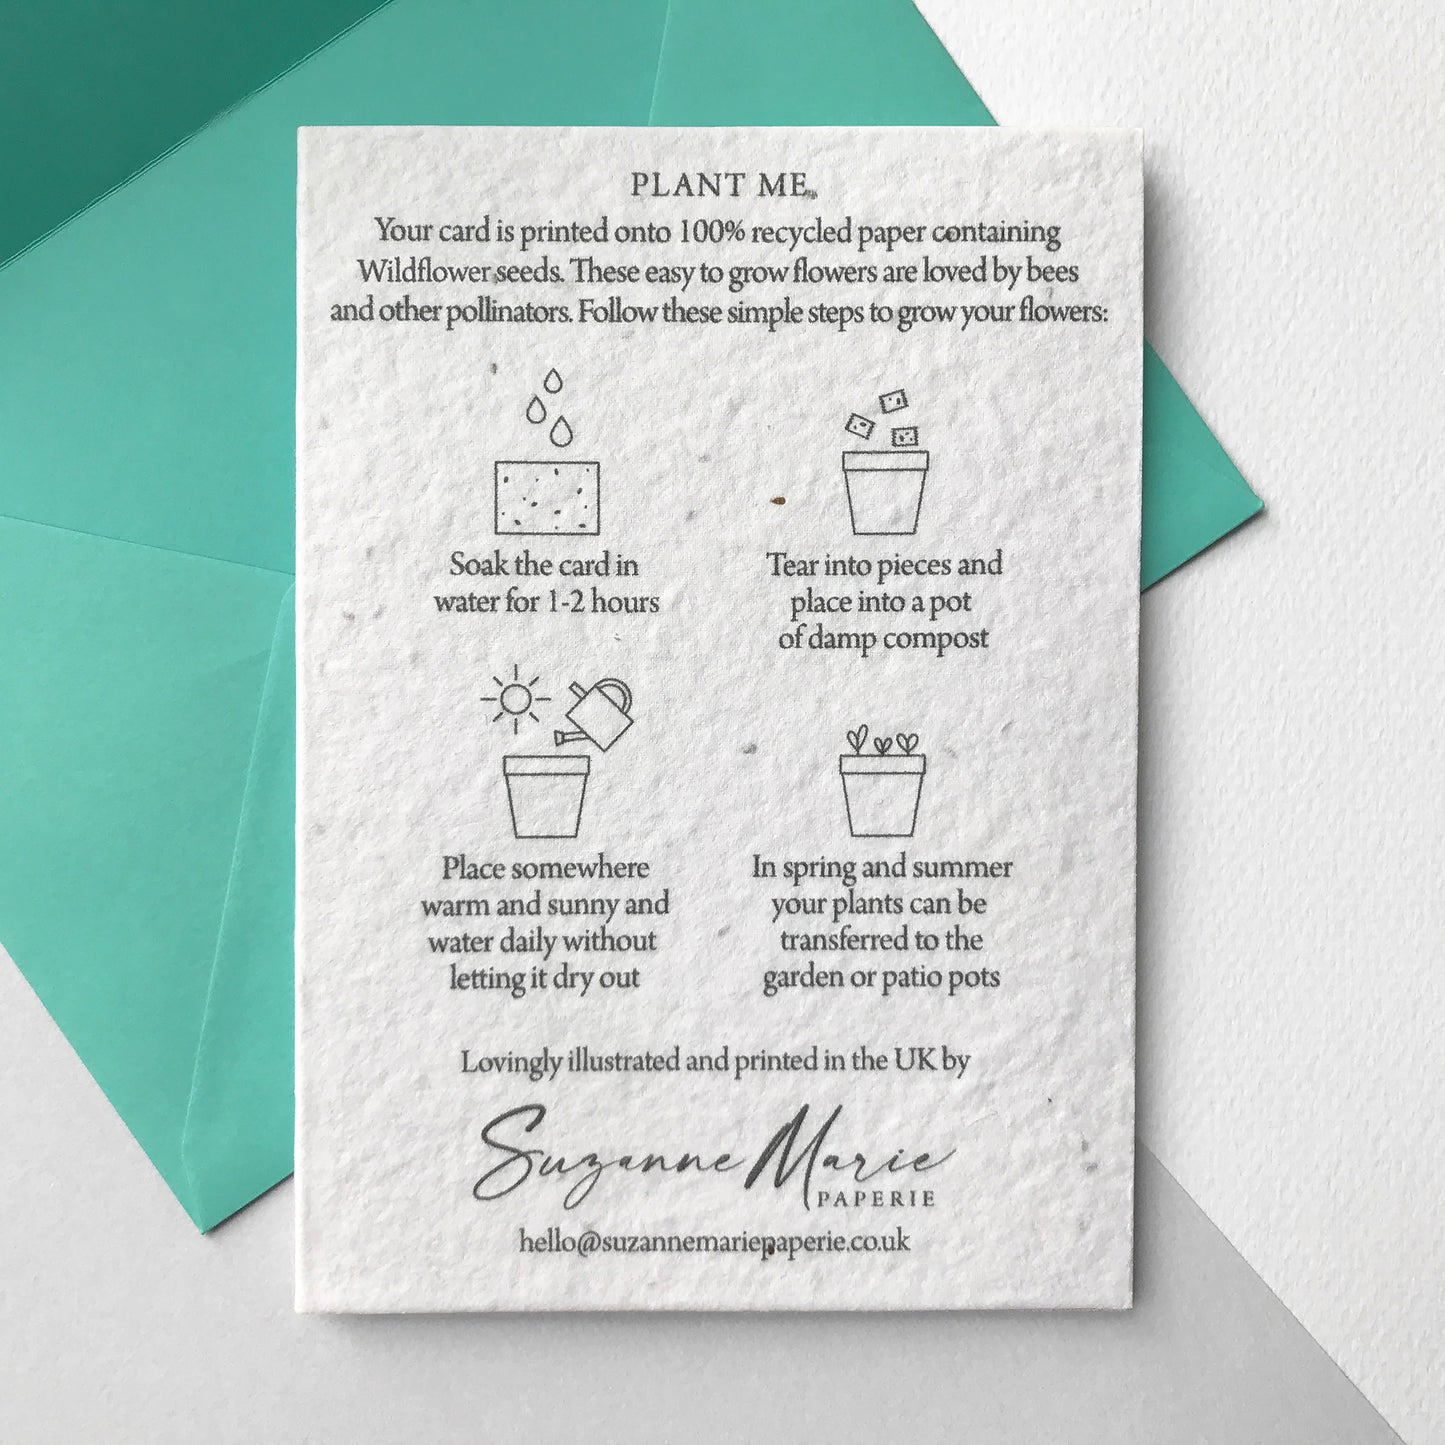 Image shows the back of the Bloom Cards plantable seed paper new home card featuring easy to follow planting instructions by Suzanne Marie Paperie.